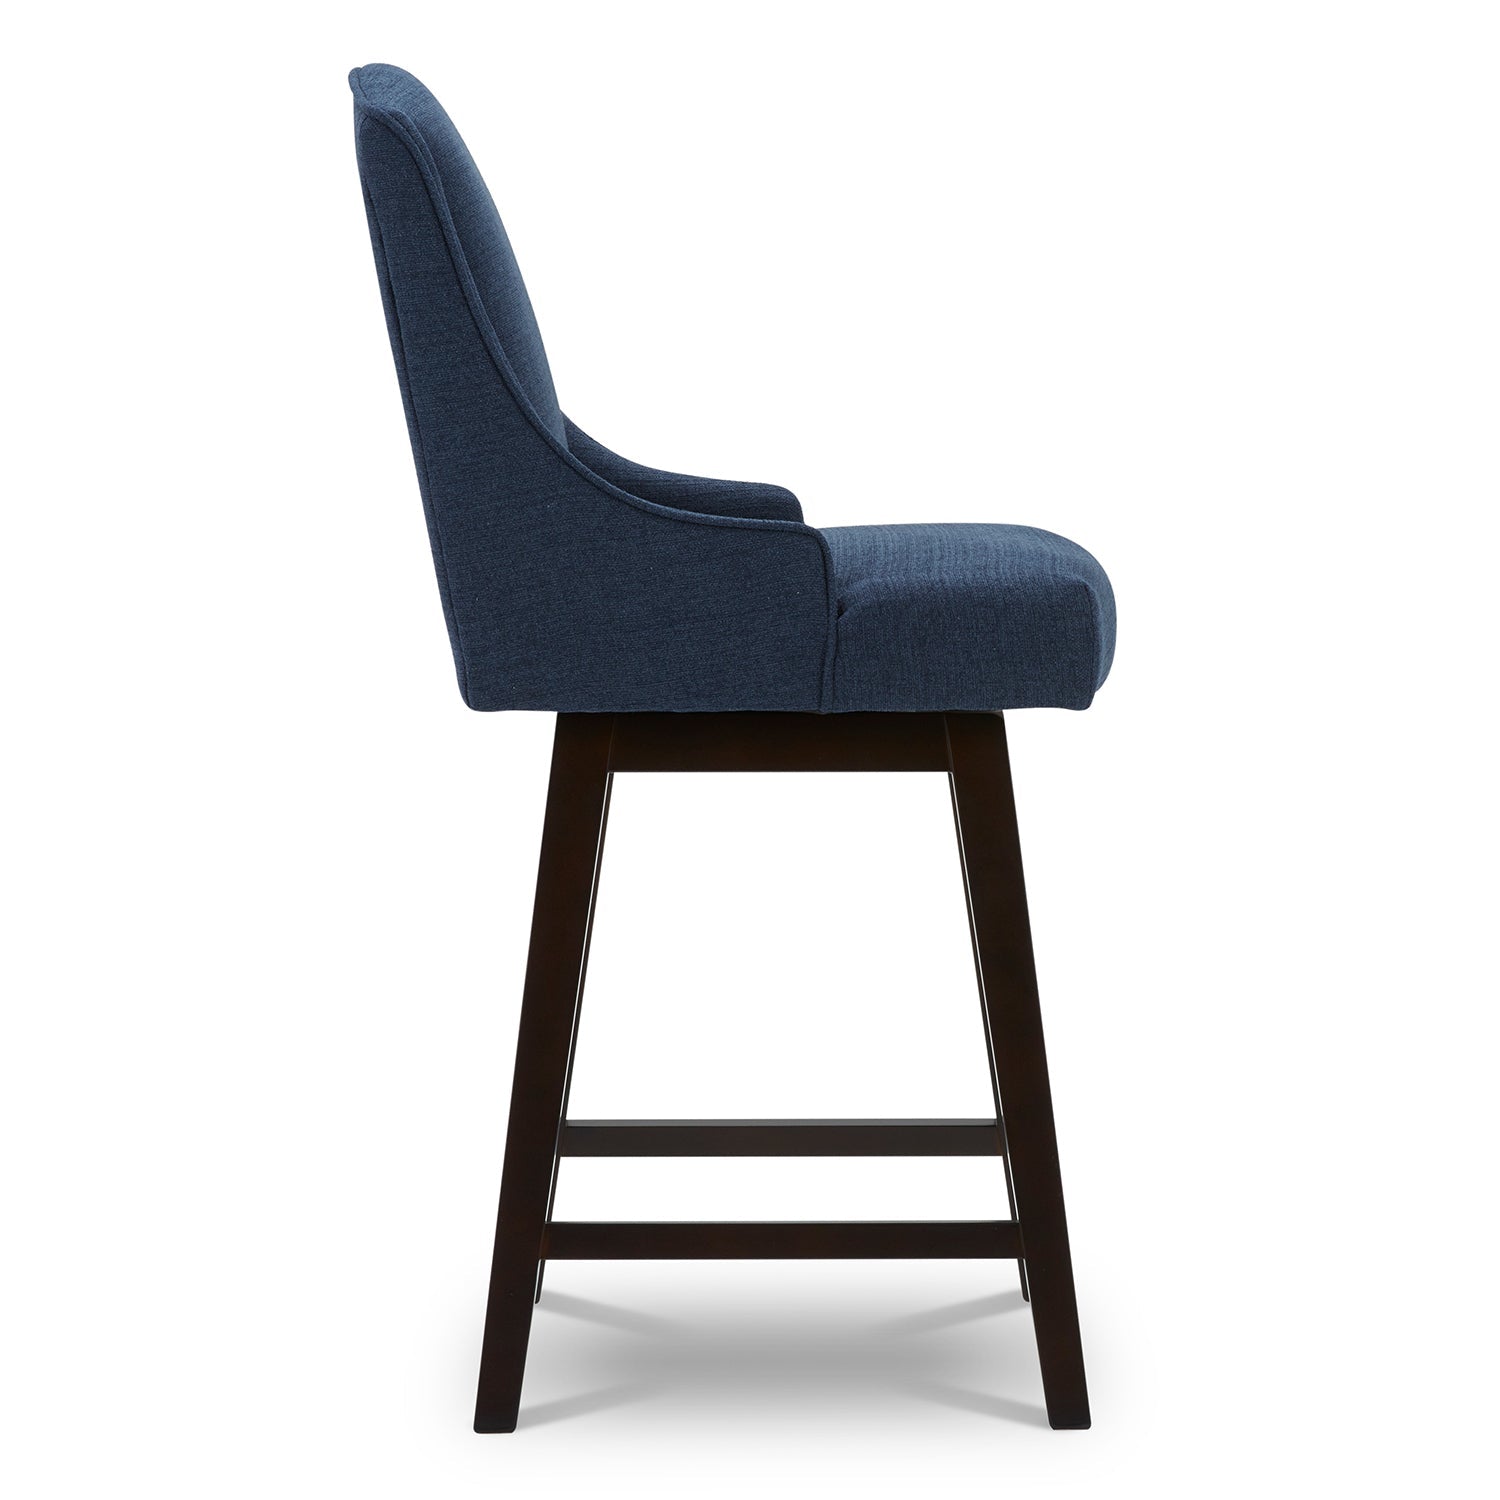 CHITA LIVING-Ryker Transitional Swivel Counter Stool - Fabric & Leather-Counter Stools-Performance Fabric-Midnight Blue-2 Pack